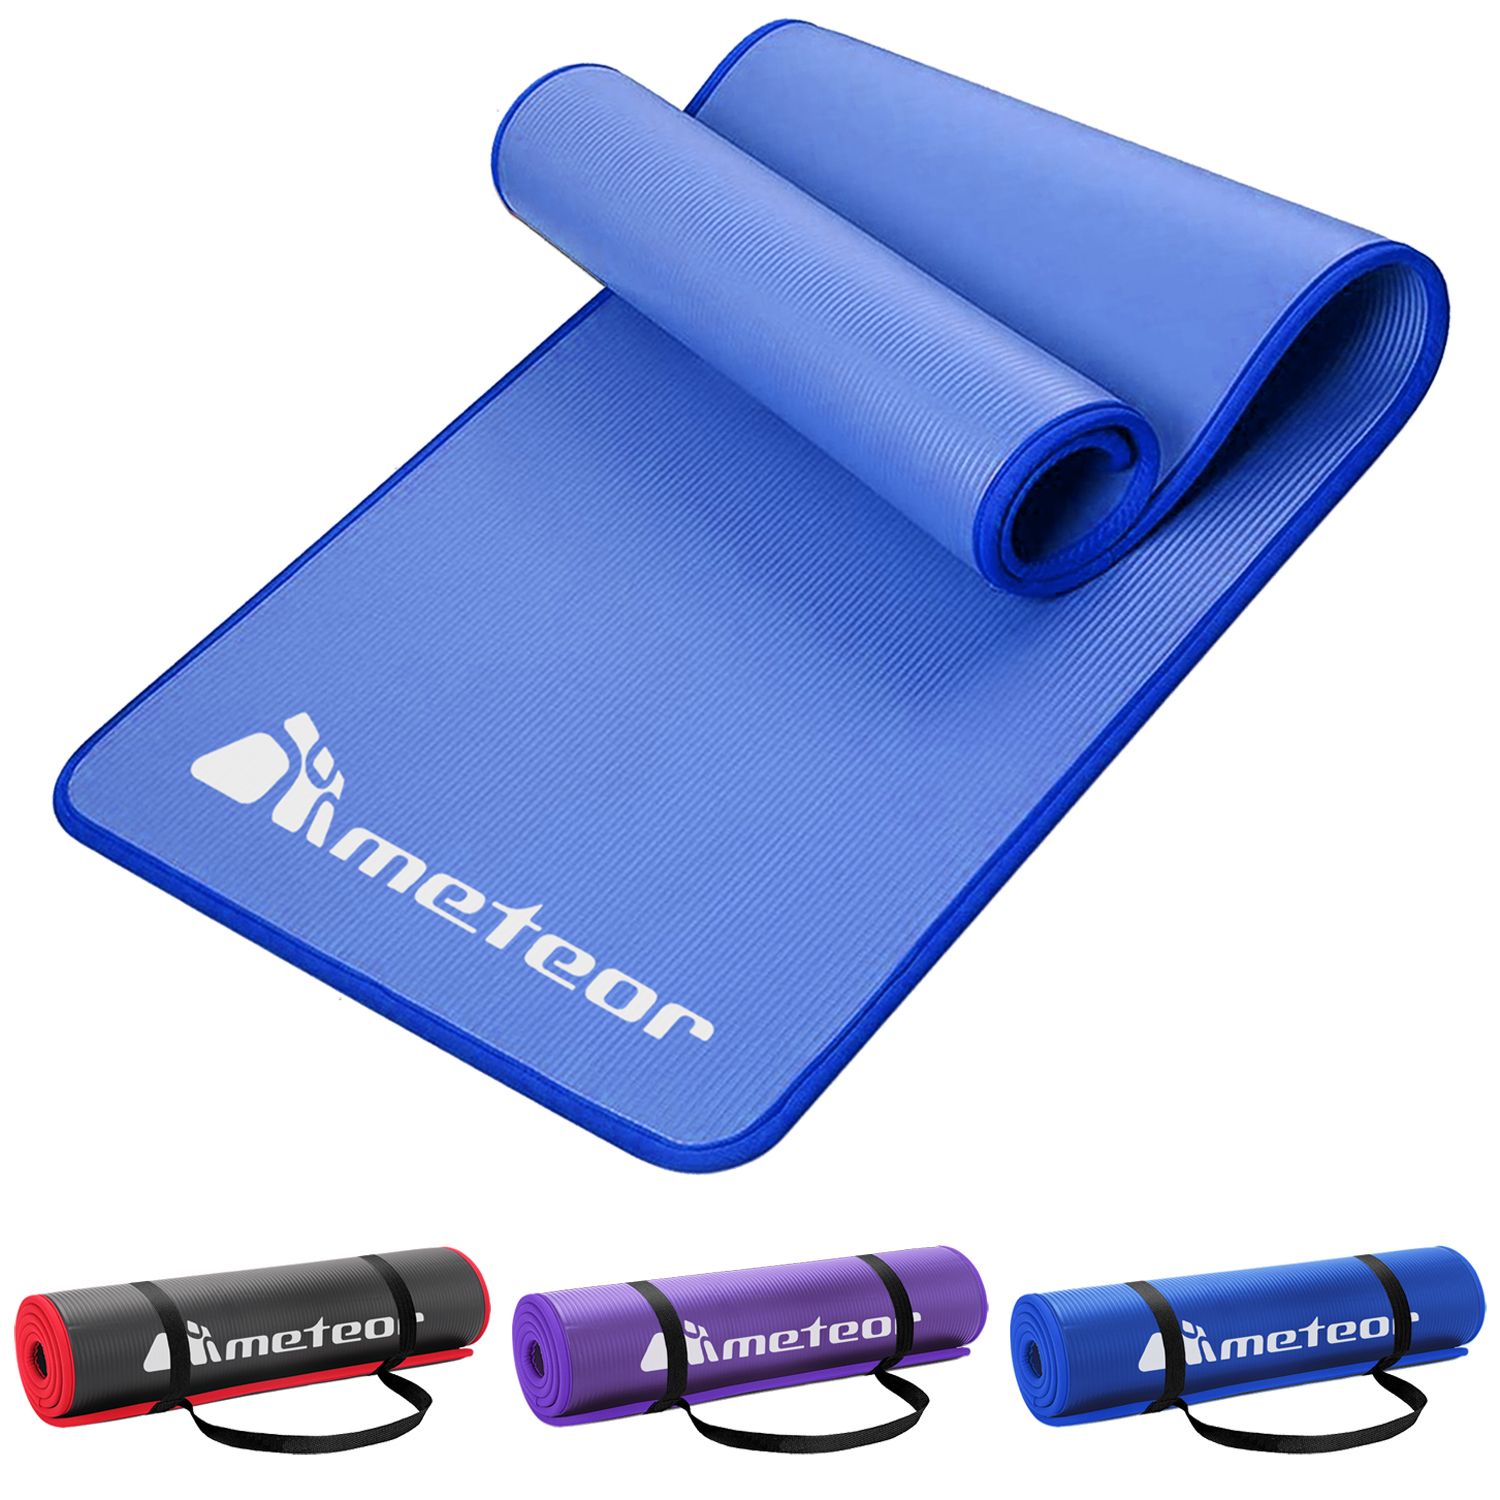 METEOR 10mm Dual-Tone NBR Yoga Mat with Alignment Lines,183x65cm